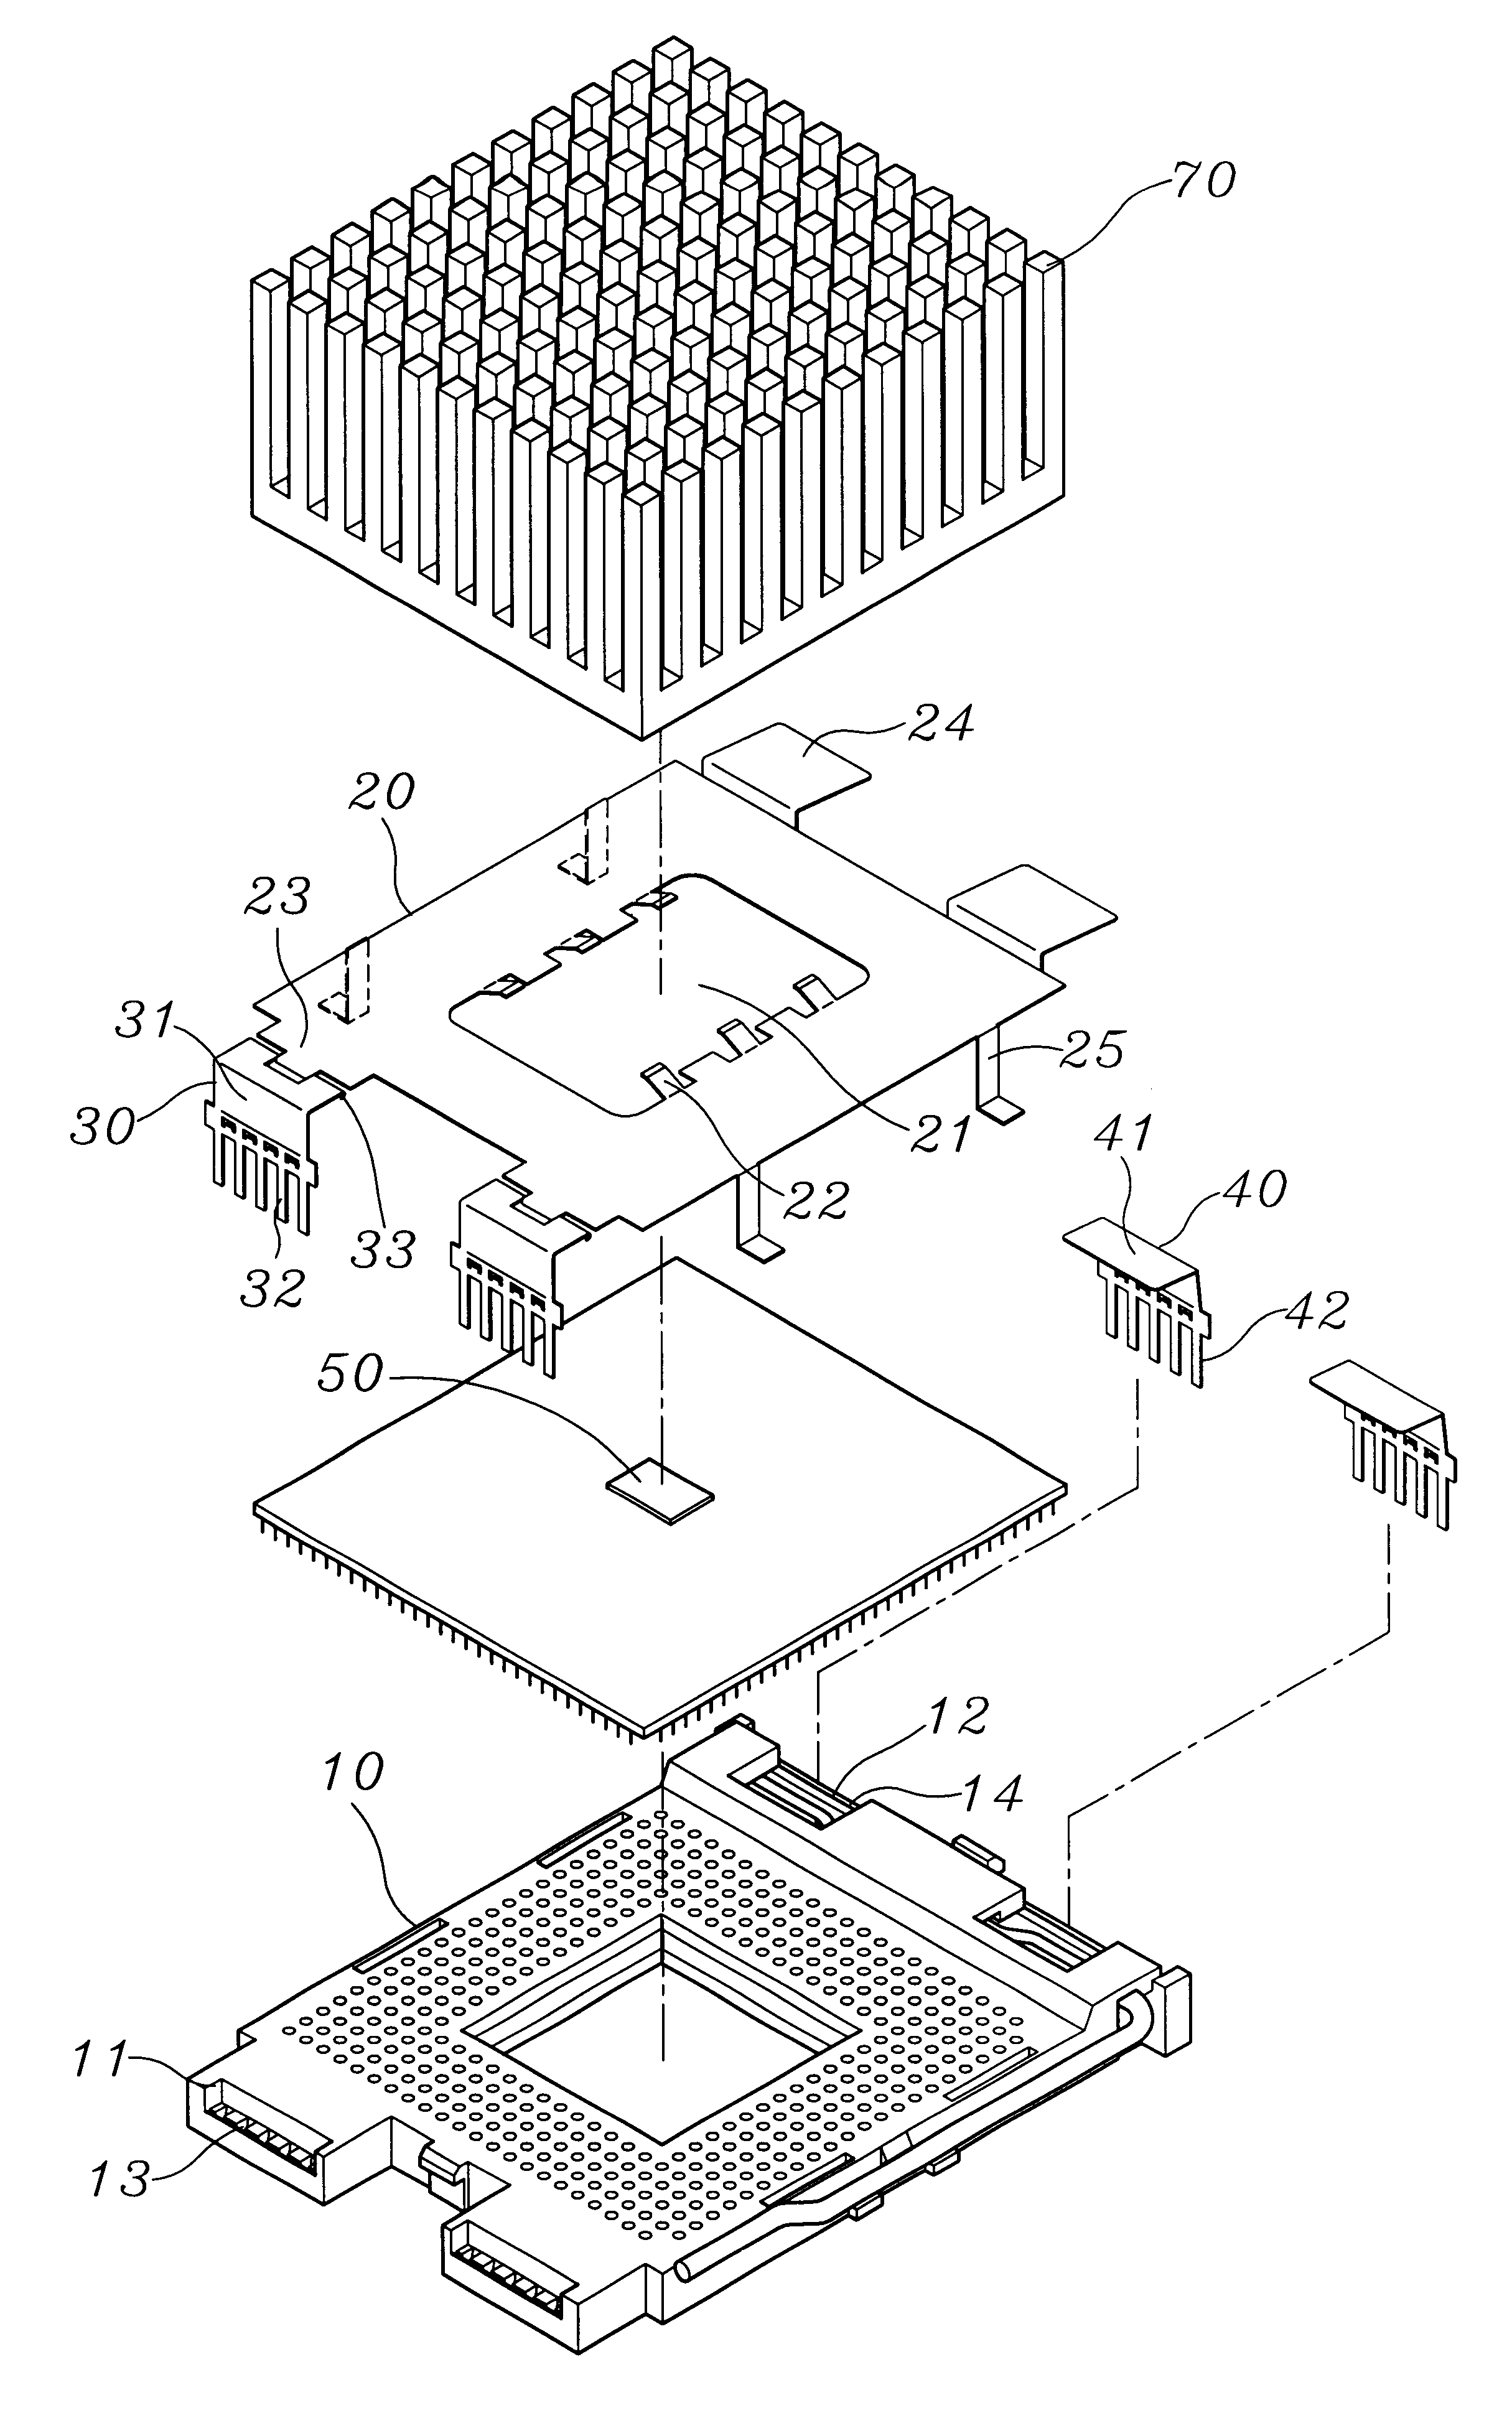 Structure for preventing electromagnetic interference of central processing unit